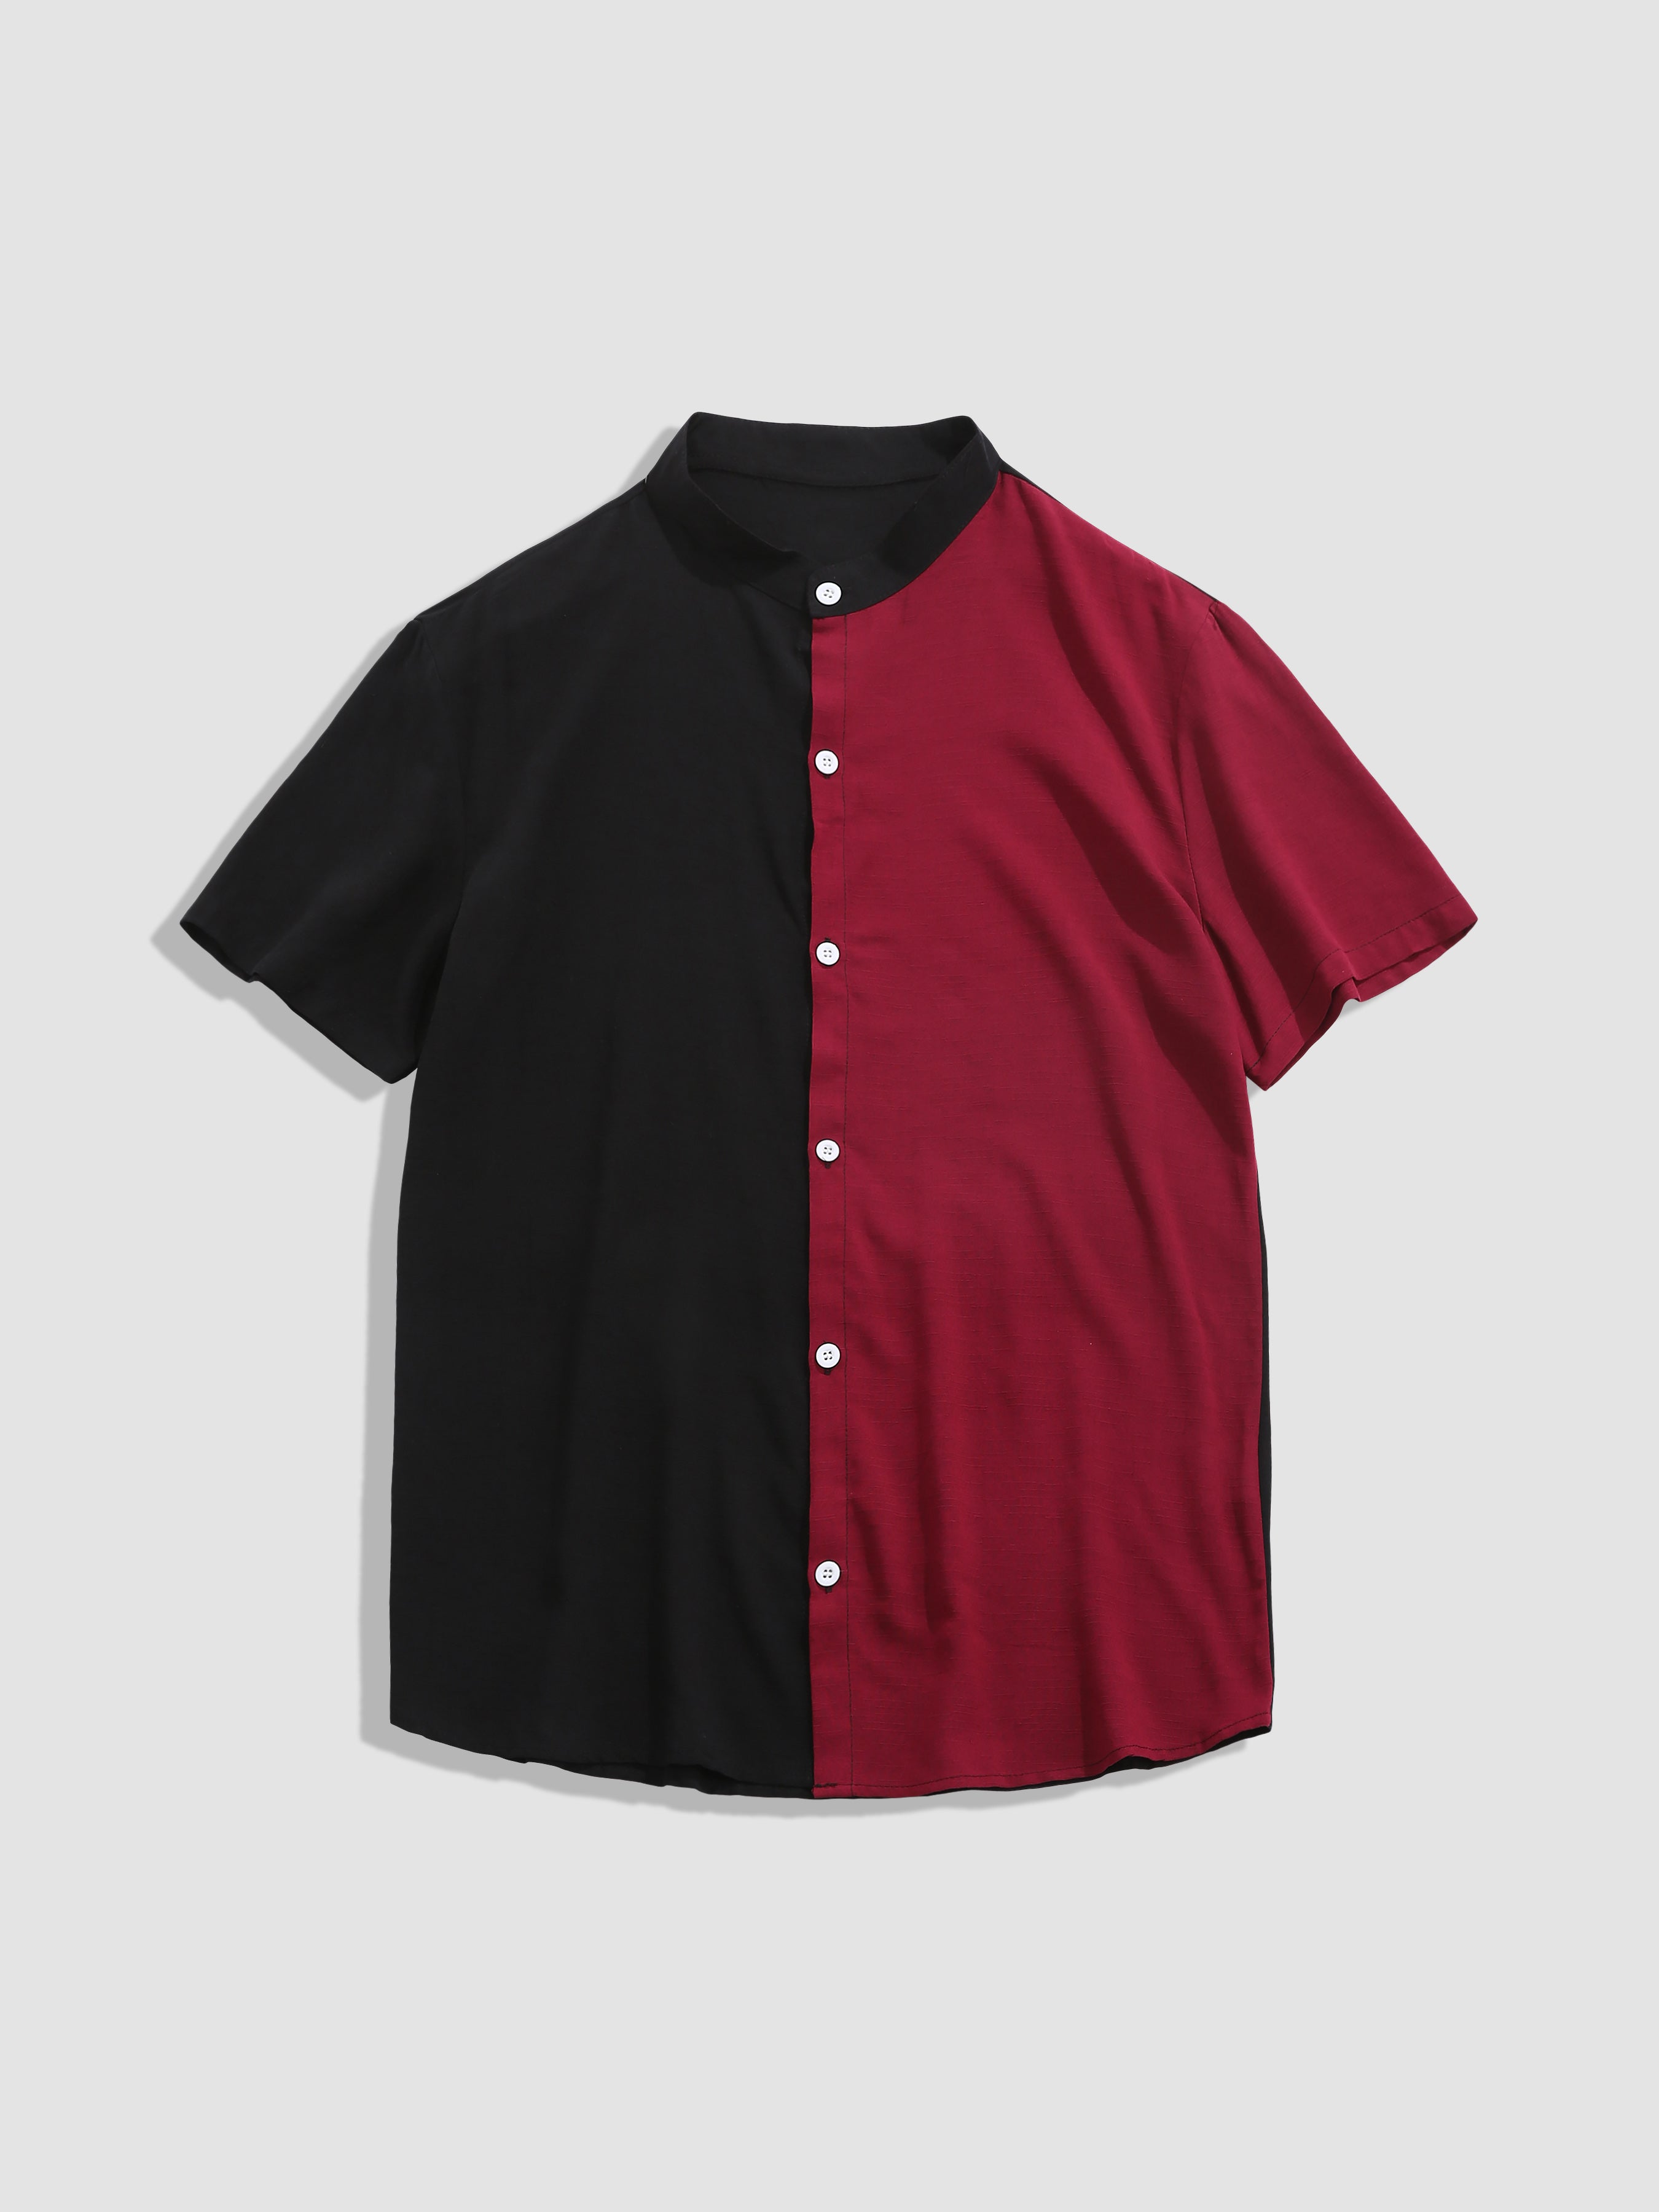 Contrast Color Short Sleeve Shirts